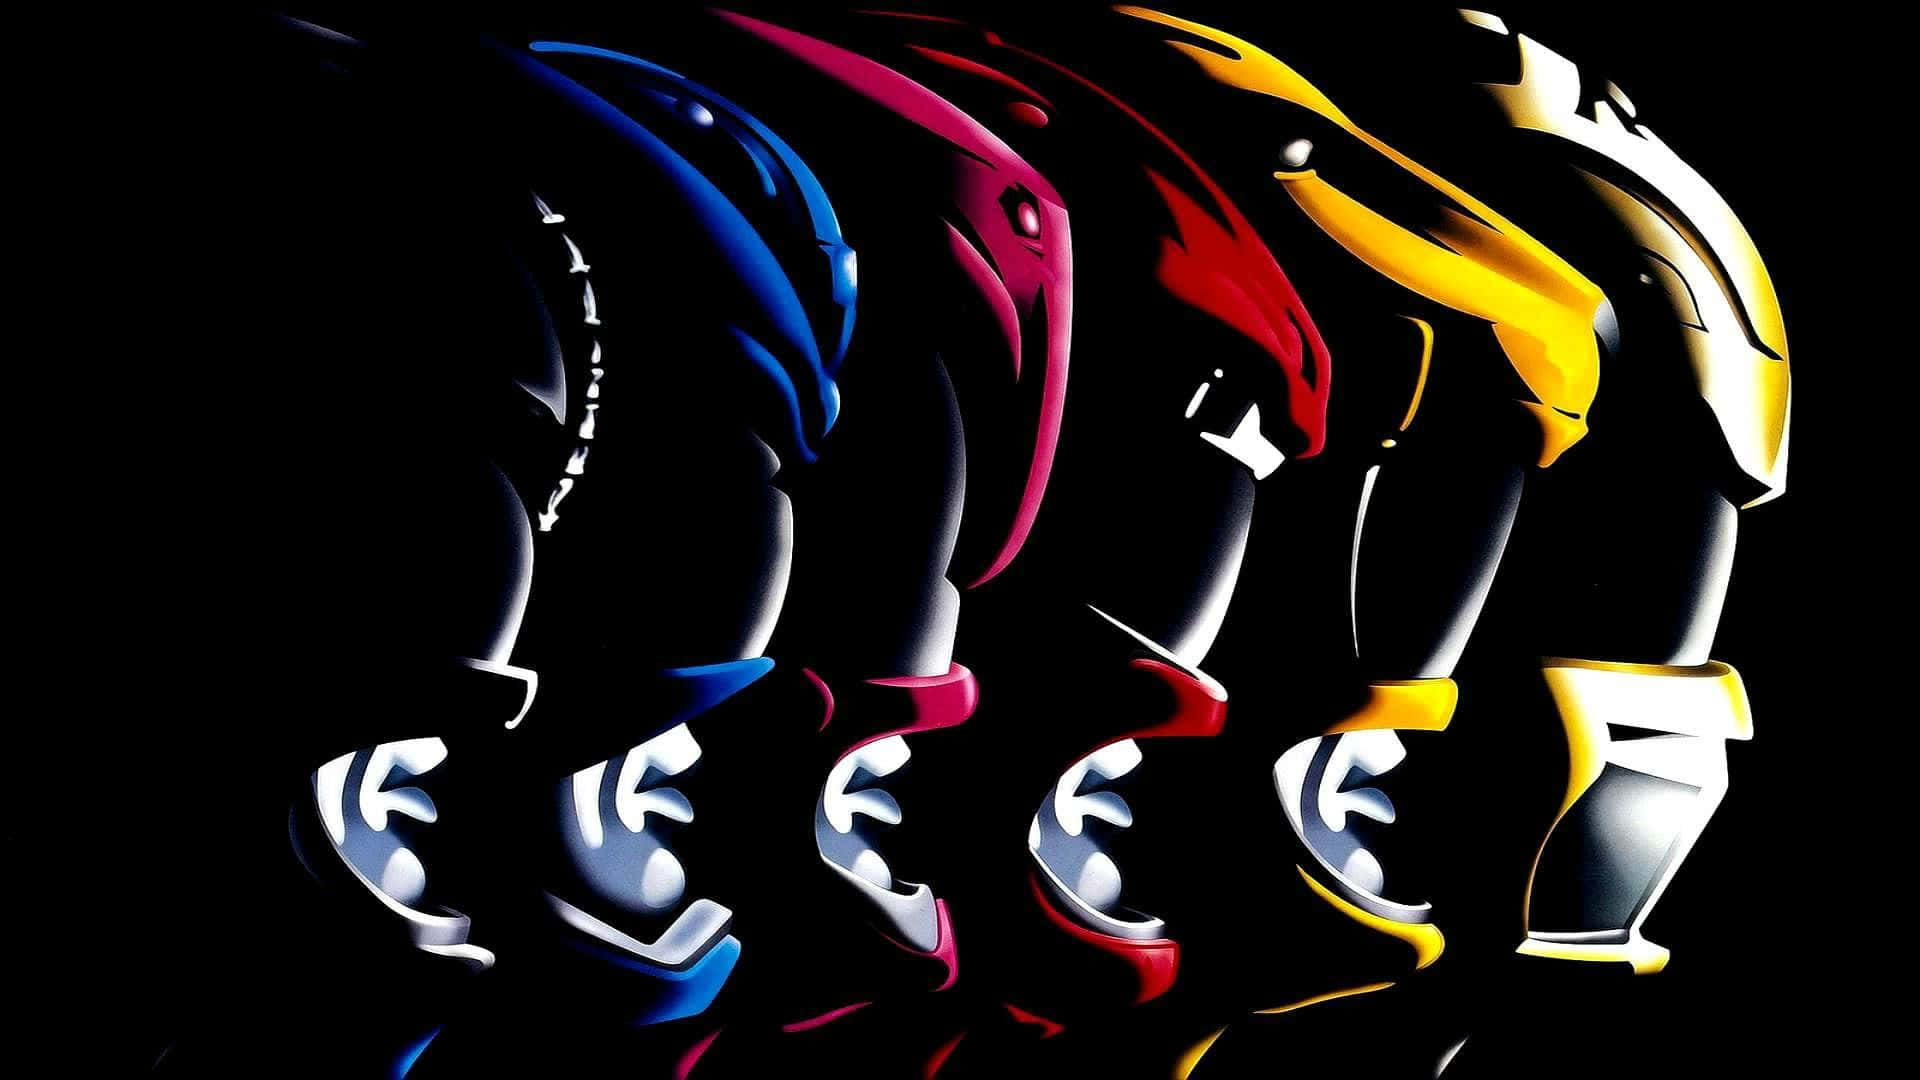 Epic Battle Pose of the Power Rangers